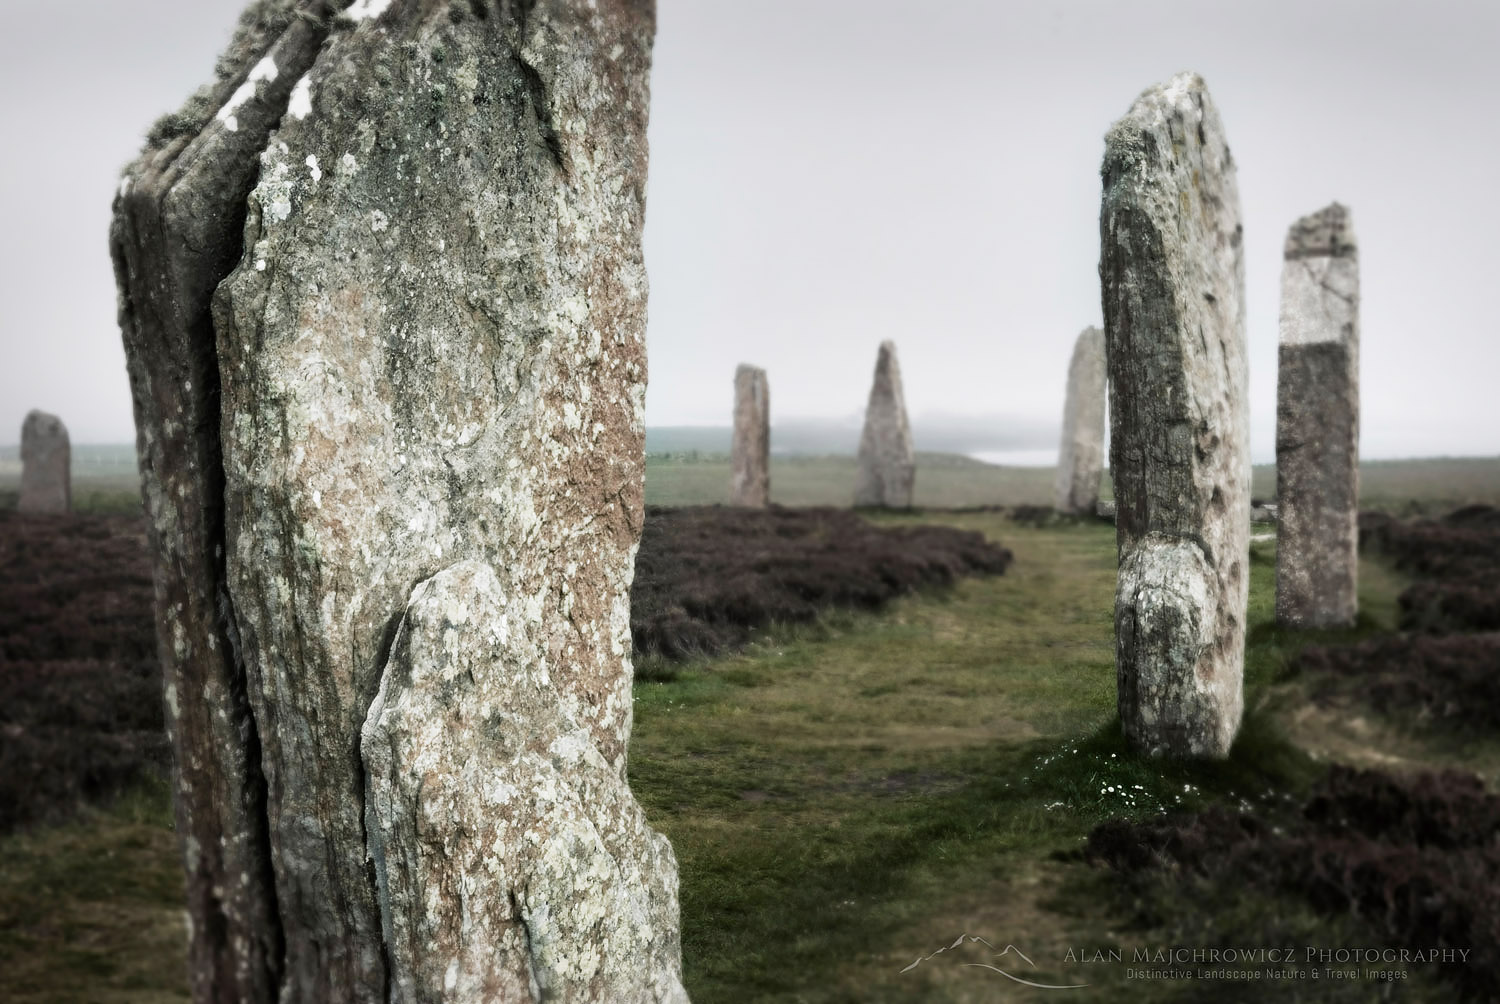 Standing stones of the Ring o' Brodgar a neolithic stone circle dating from approximately 2500 BC, Orkney Islands Scotland #12527r